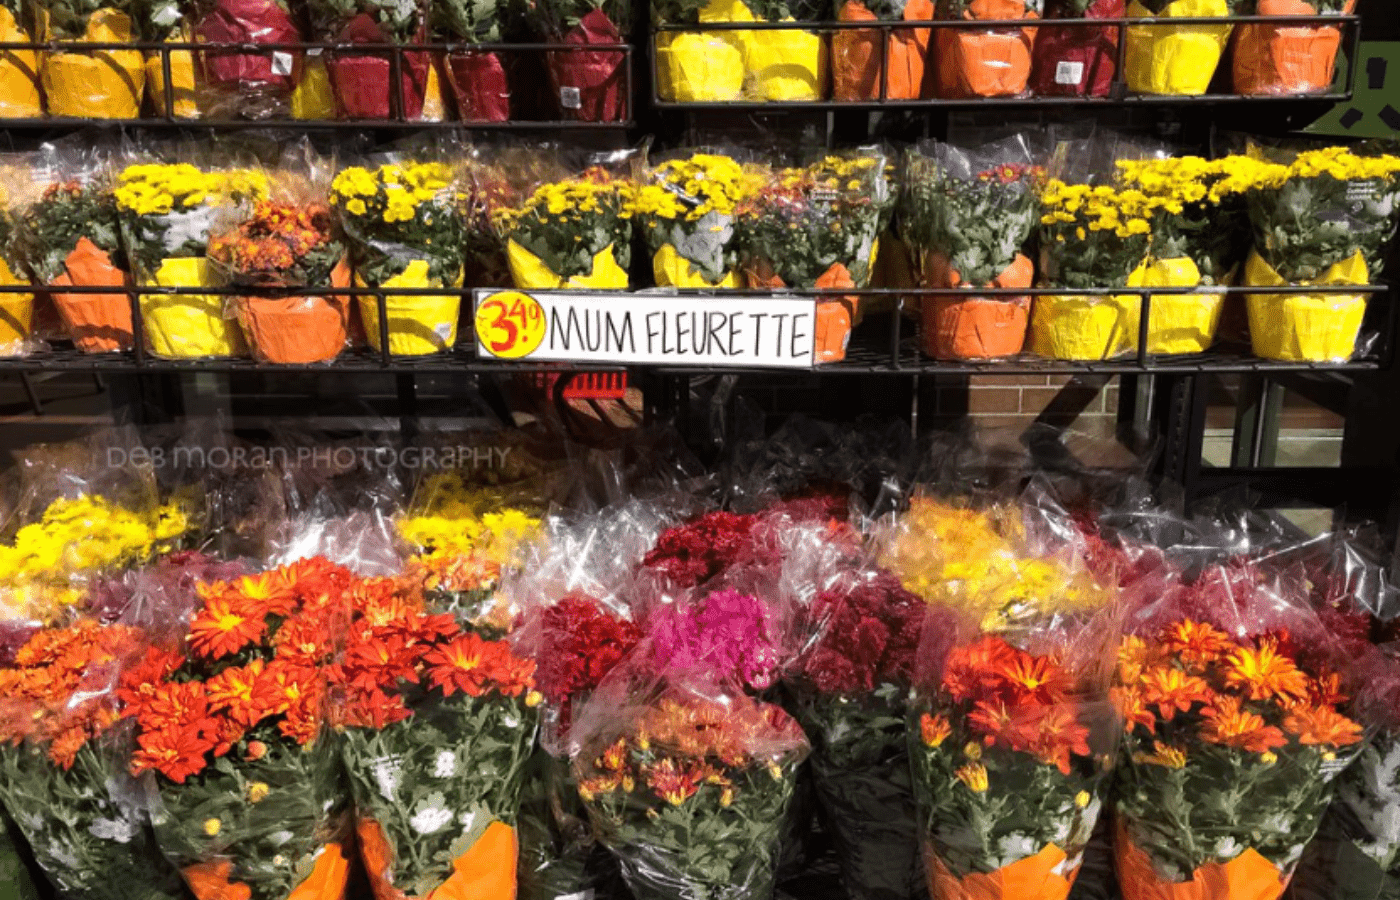 Trader Joe's Return Policy for Flowers